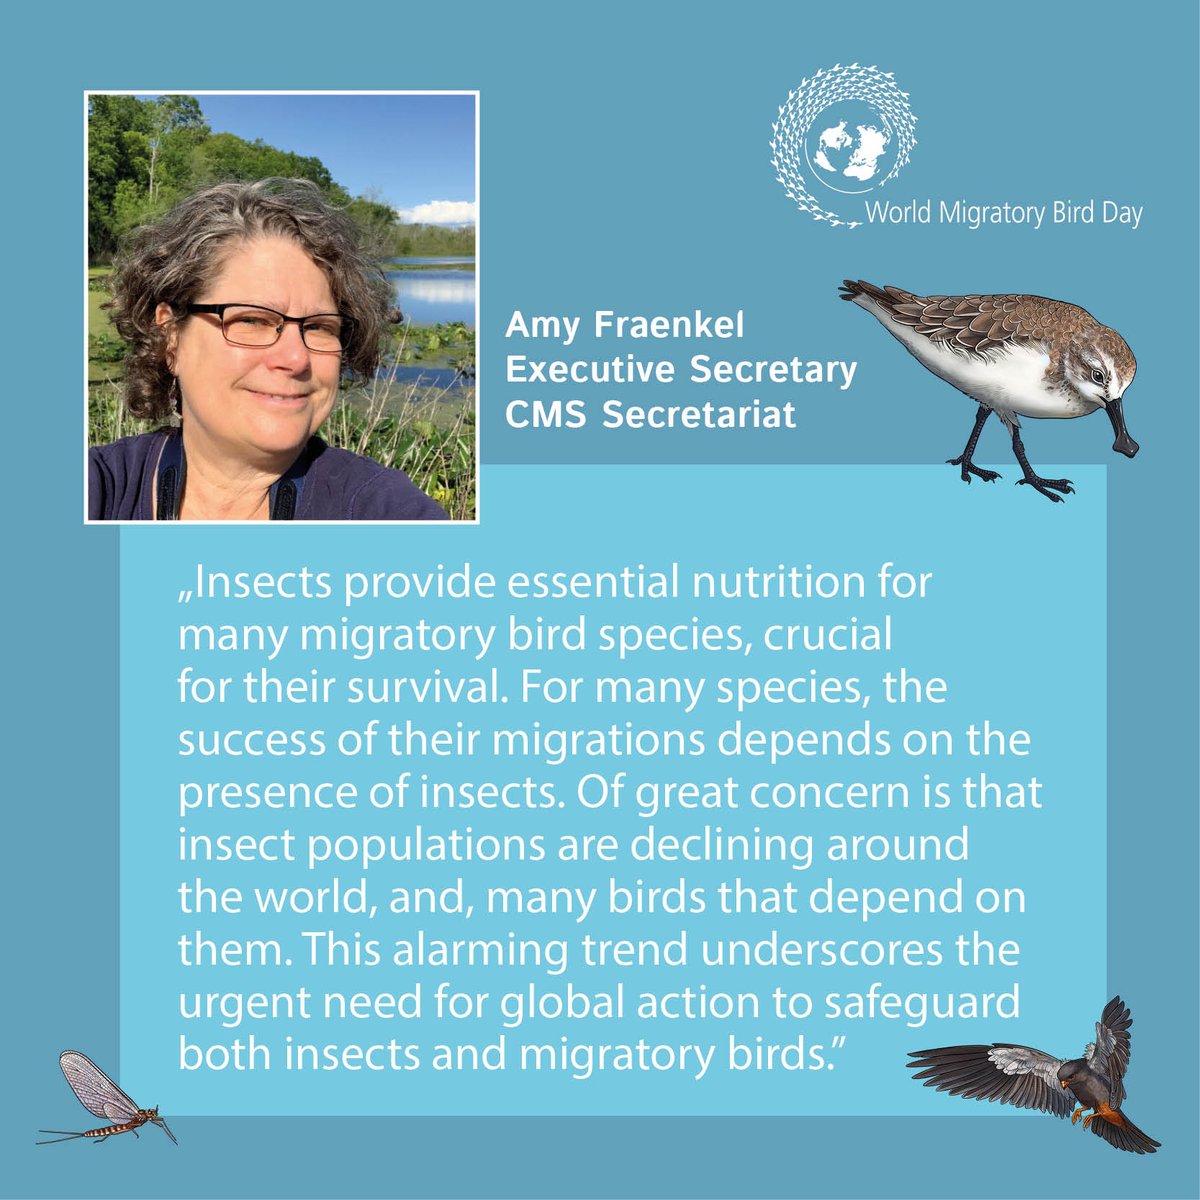 #WorldMigratoryBirdDay is coming up tomorrow and focuses on the importance of insects for migratory birds. Insect populations are declining globally, and this phenomenon is mirrored by a decrease in populations of birds. #ProtectInsectsProtectBirds ⬇️ worldmigratorybirdday.org